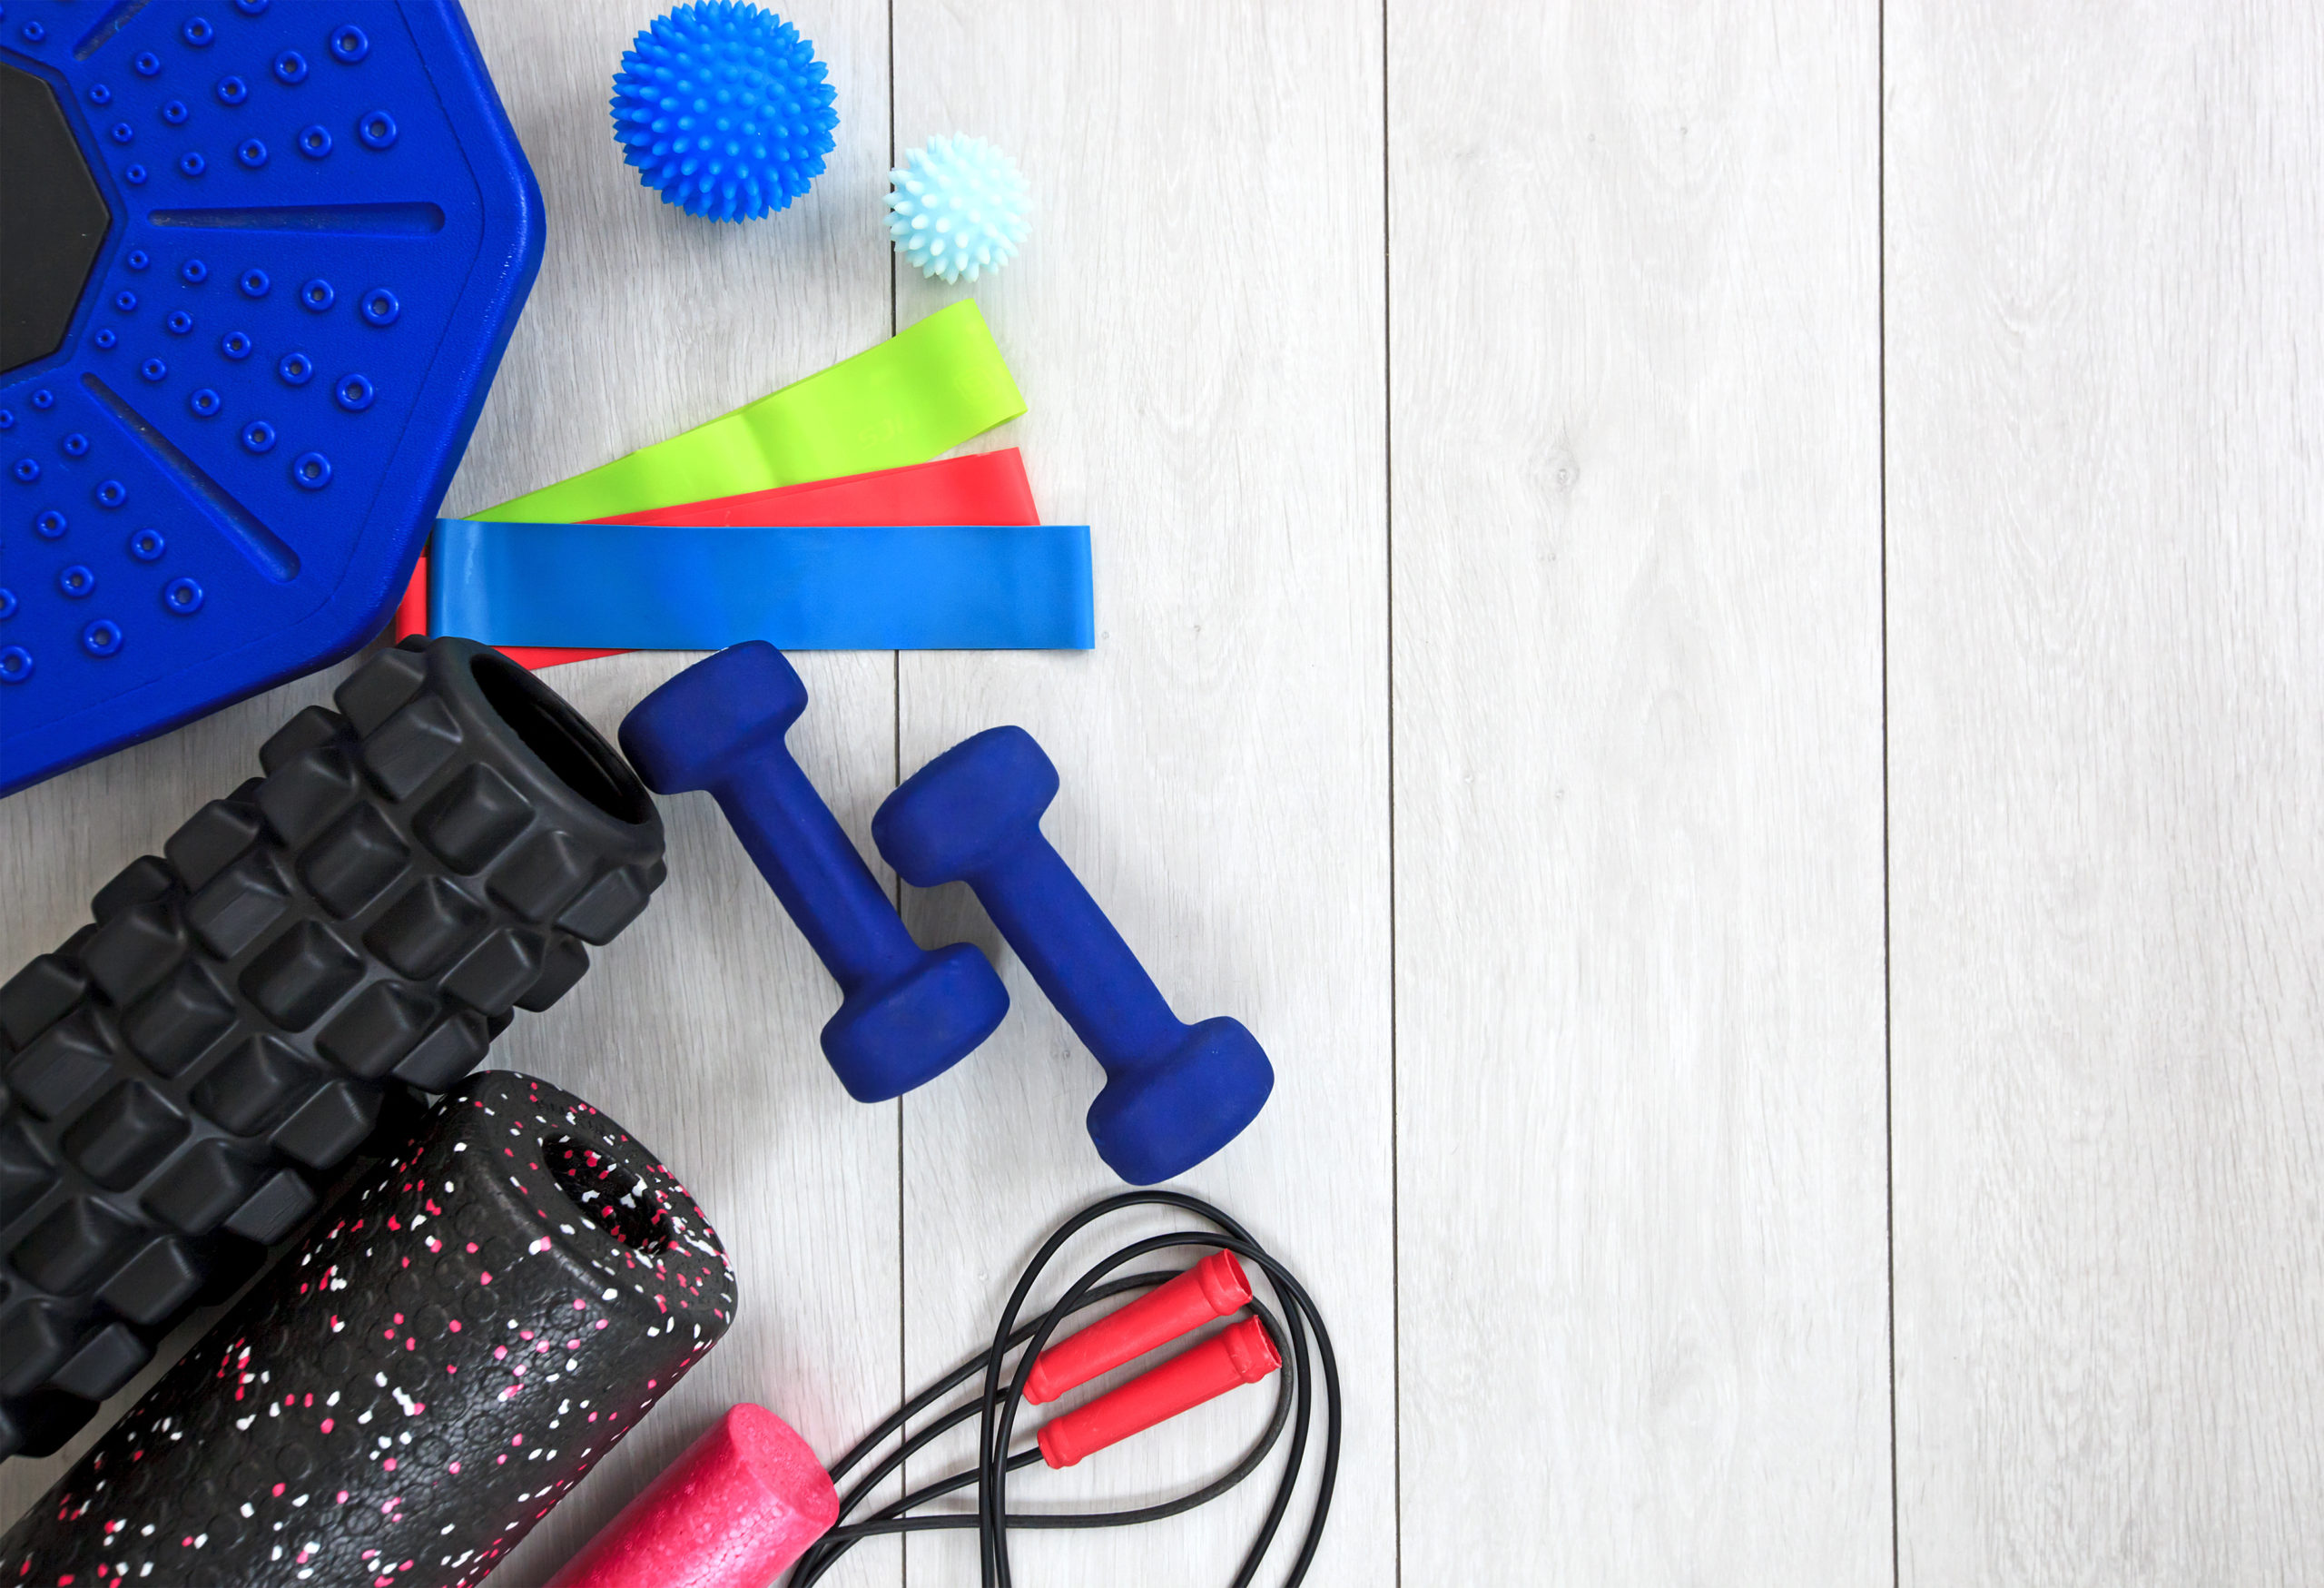 A lot of different fitness and sport accessories and equipment on the wooden floor at home